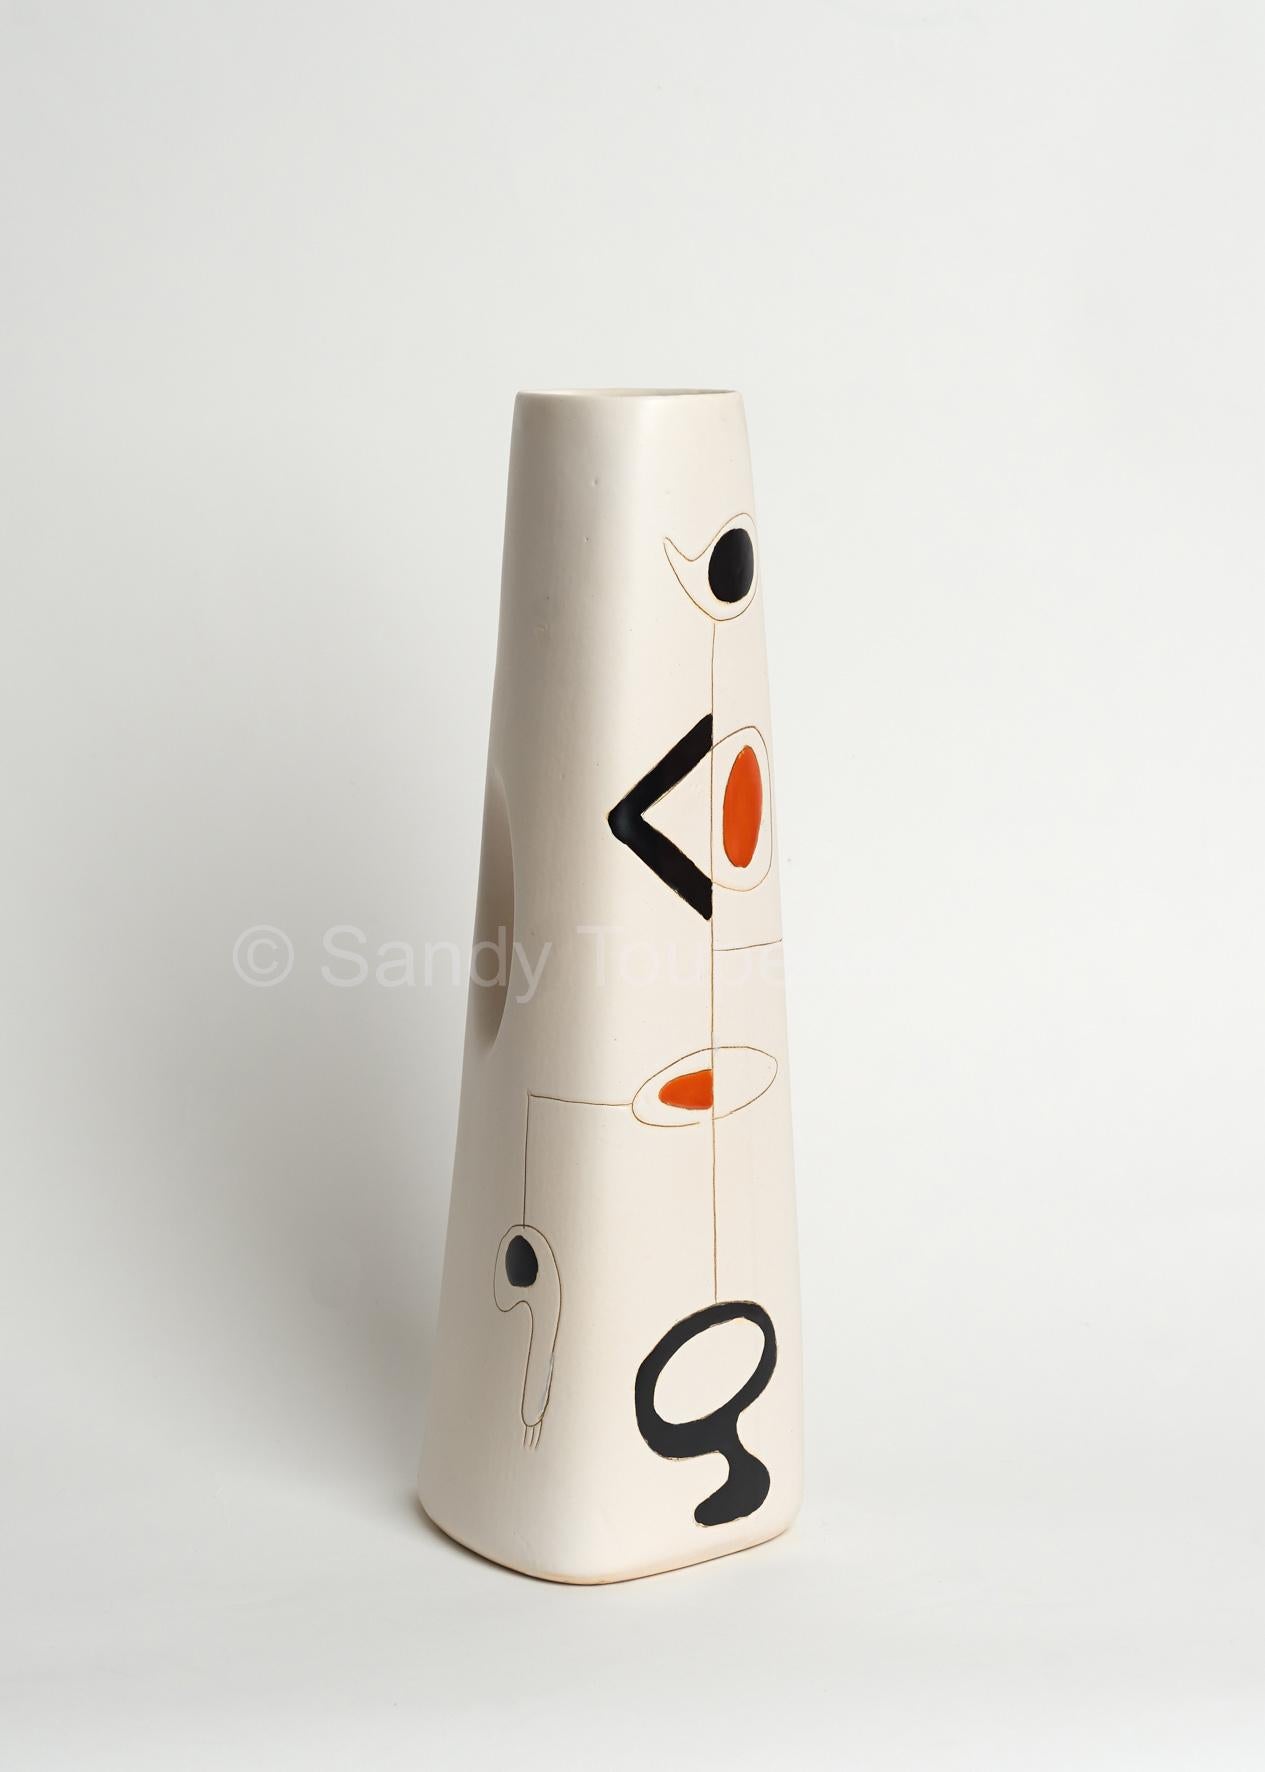 Earthenware vase glazed in white with abstract and geometric decoration engraved and over-glazed in shinny black and orange.
Hand-decorated piece, made in France, circa 1950-1960.
Typical Mid-Century Modern abstract and geometric design,